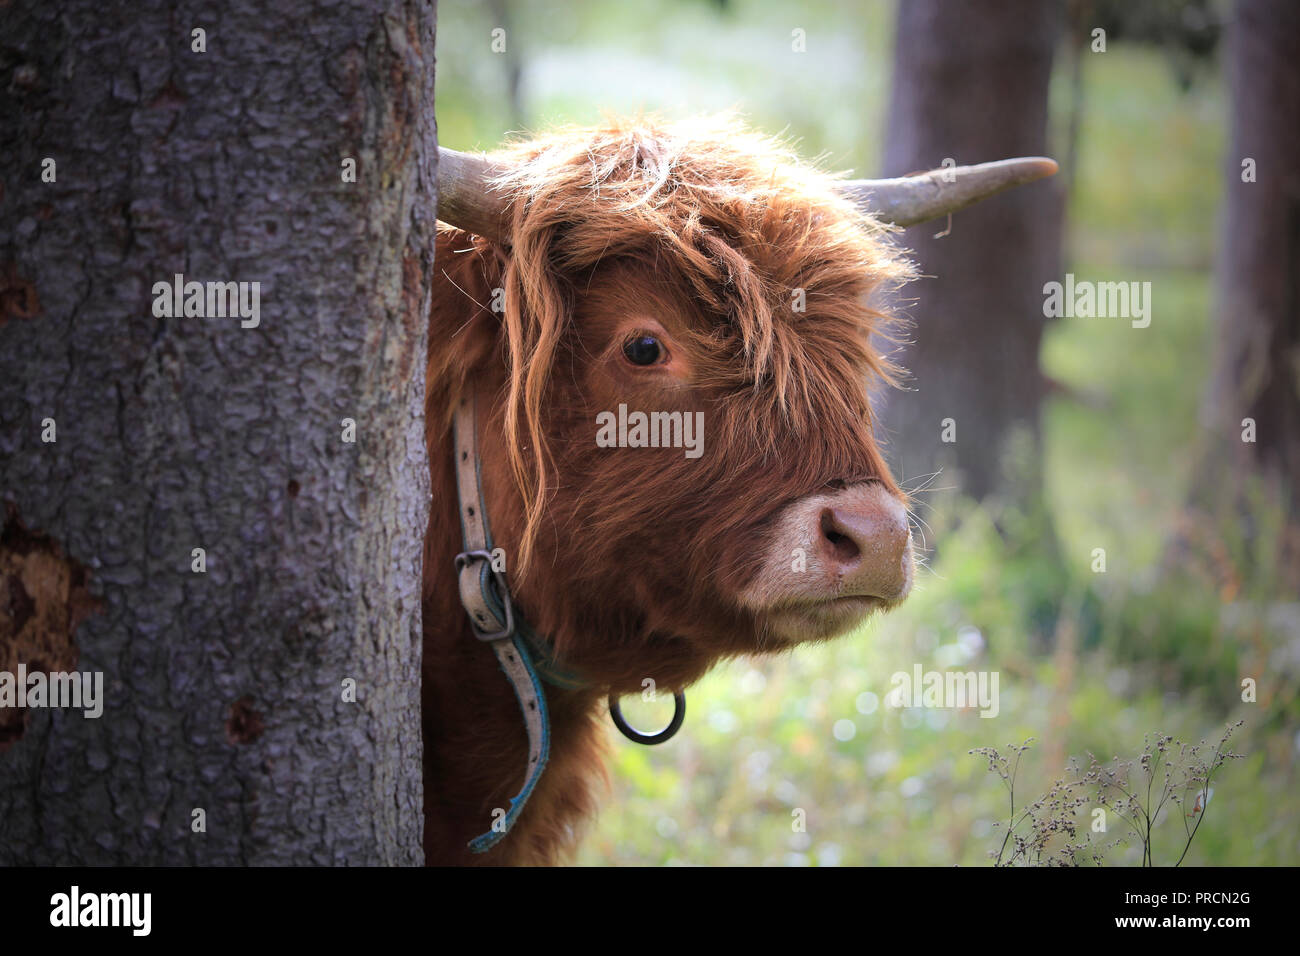 Young, timid and curious Highland bull peeks behind a tree. Stock Photo